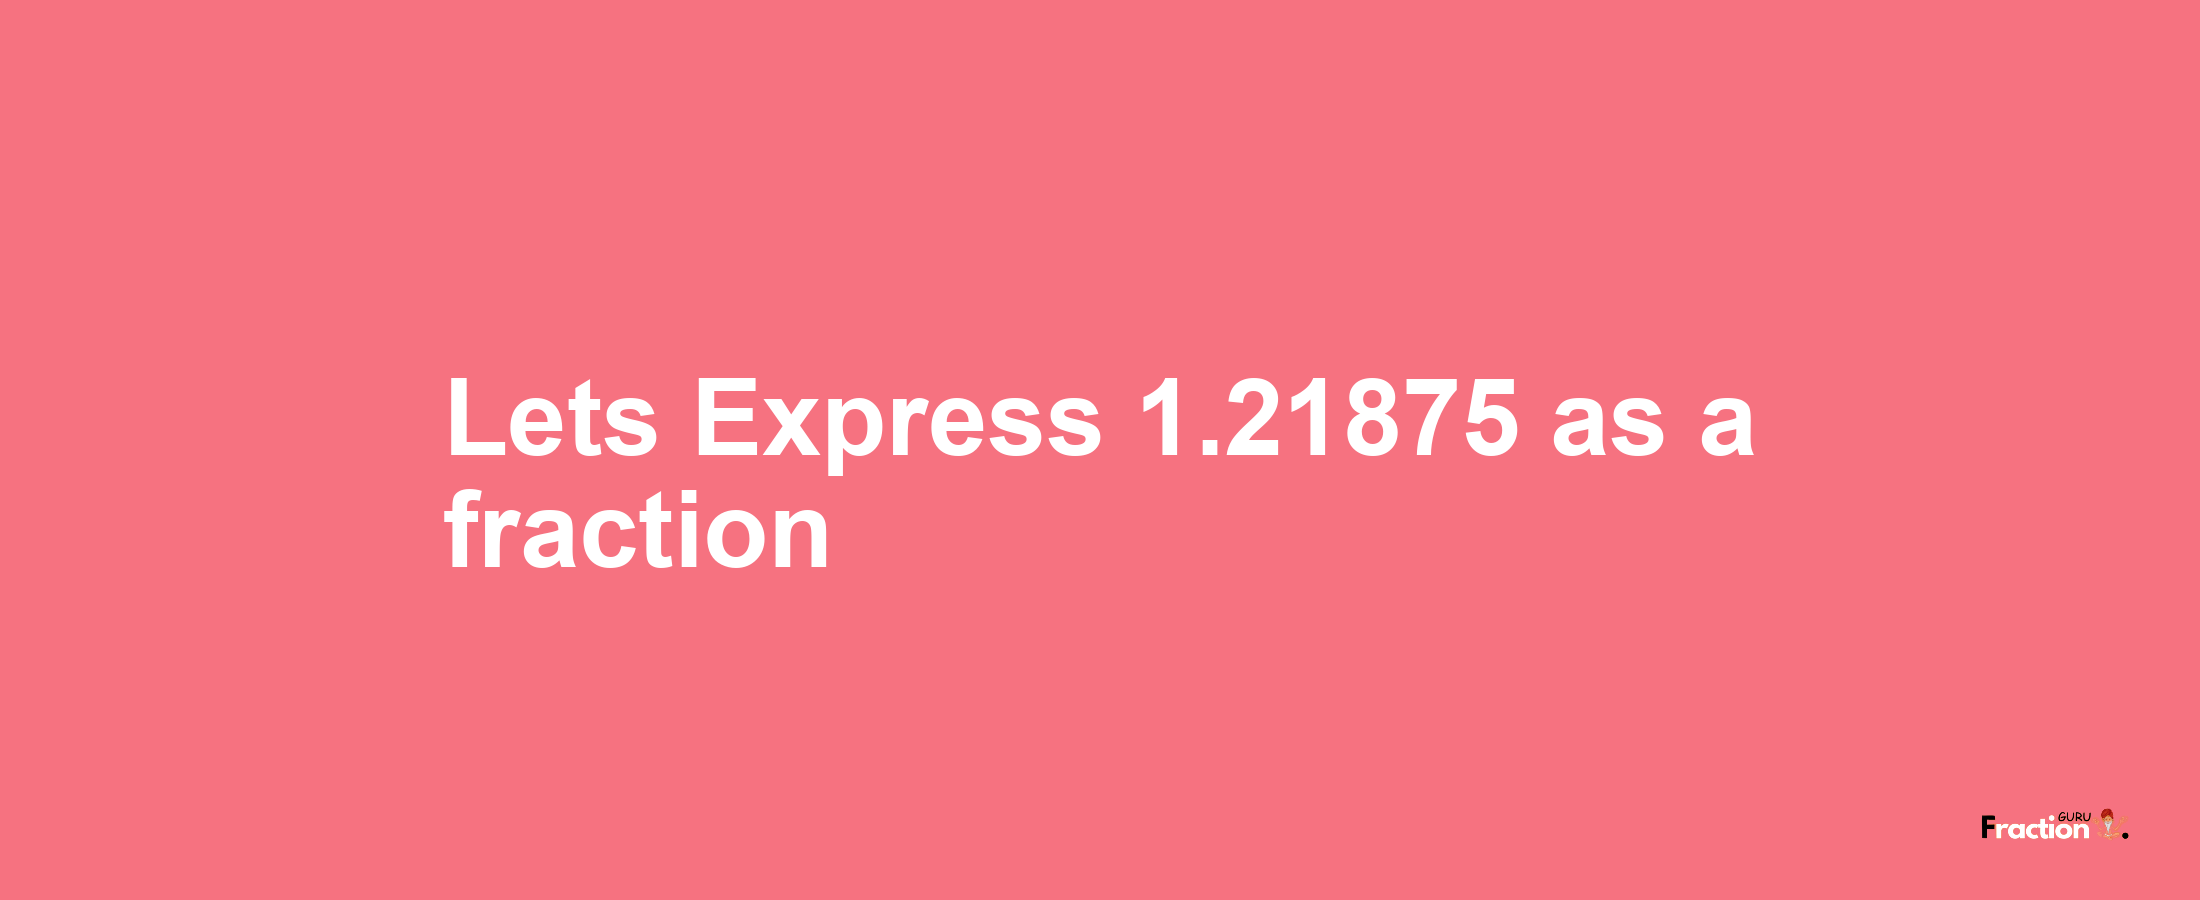 Lets Express 1.21875 as afraction